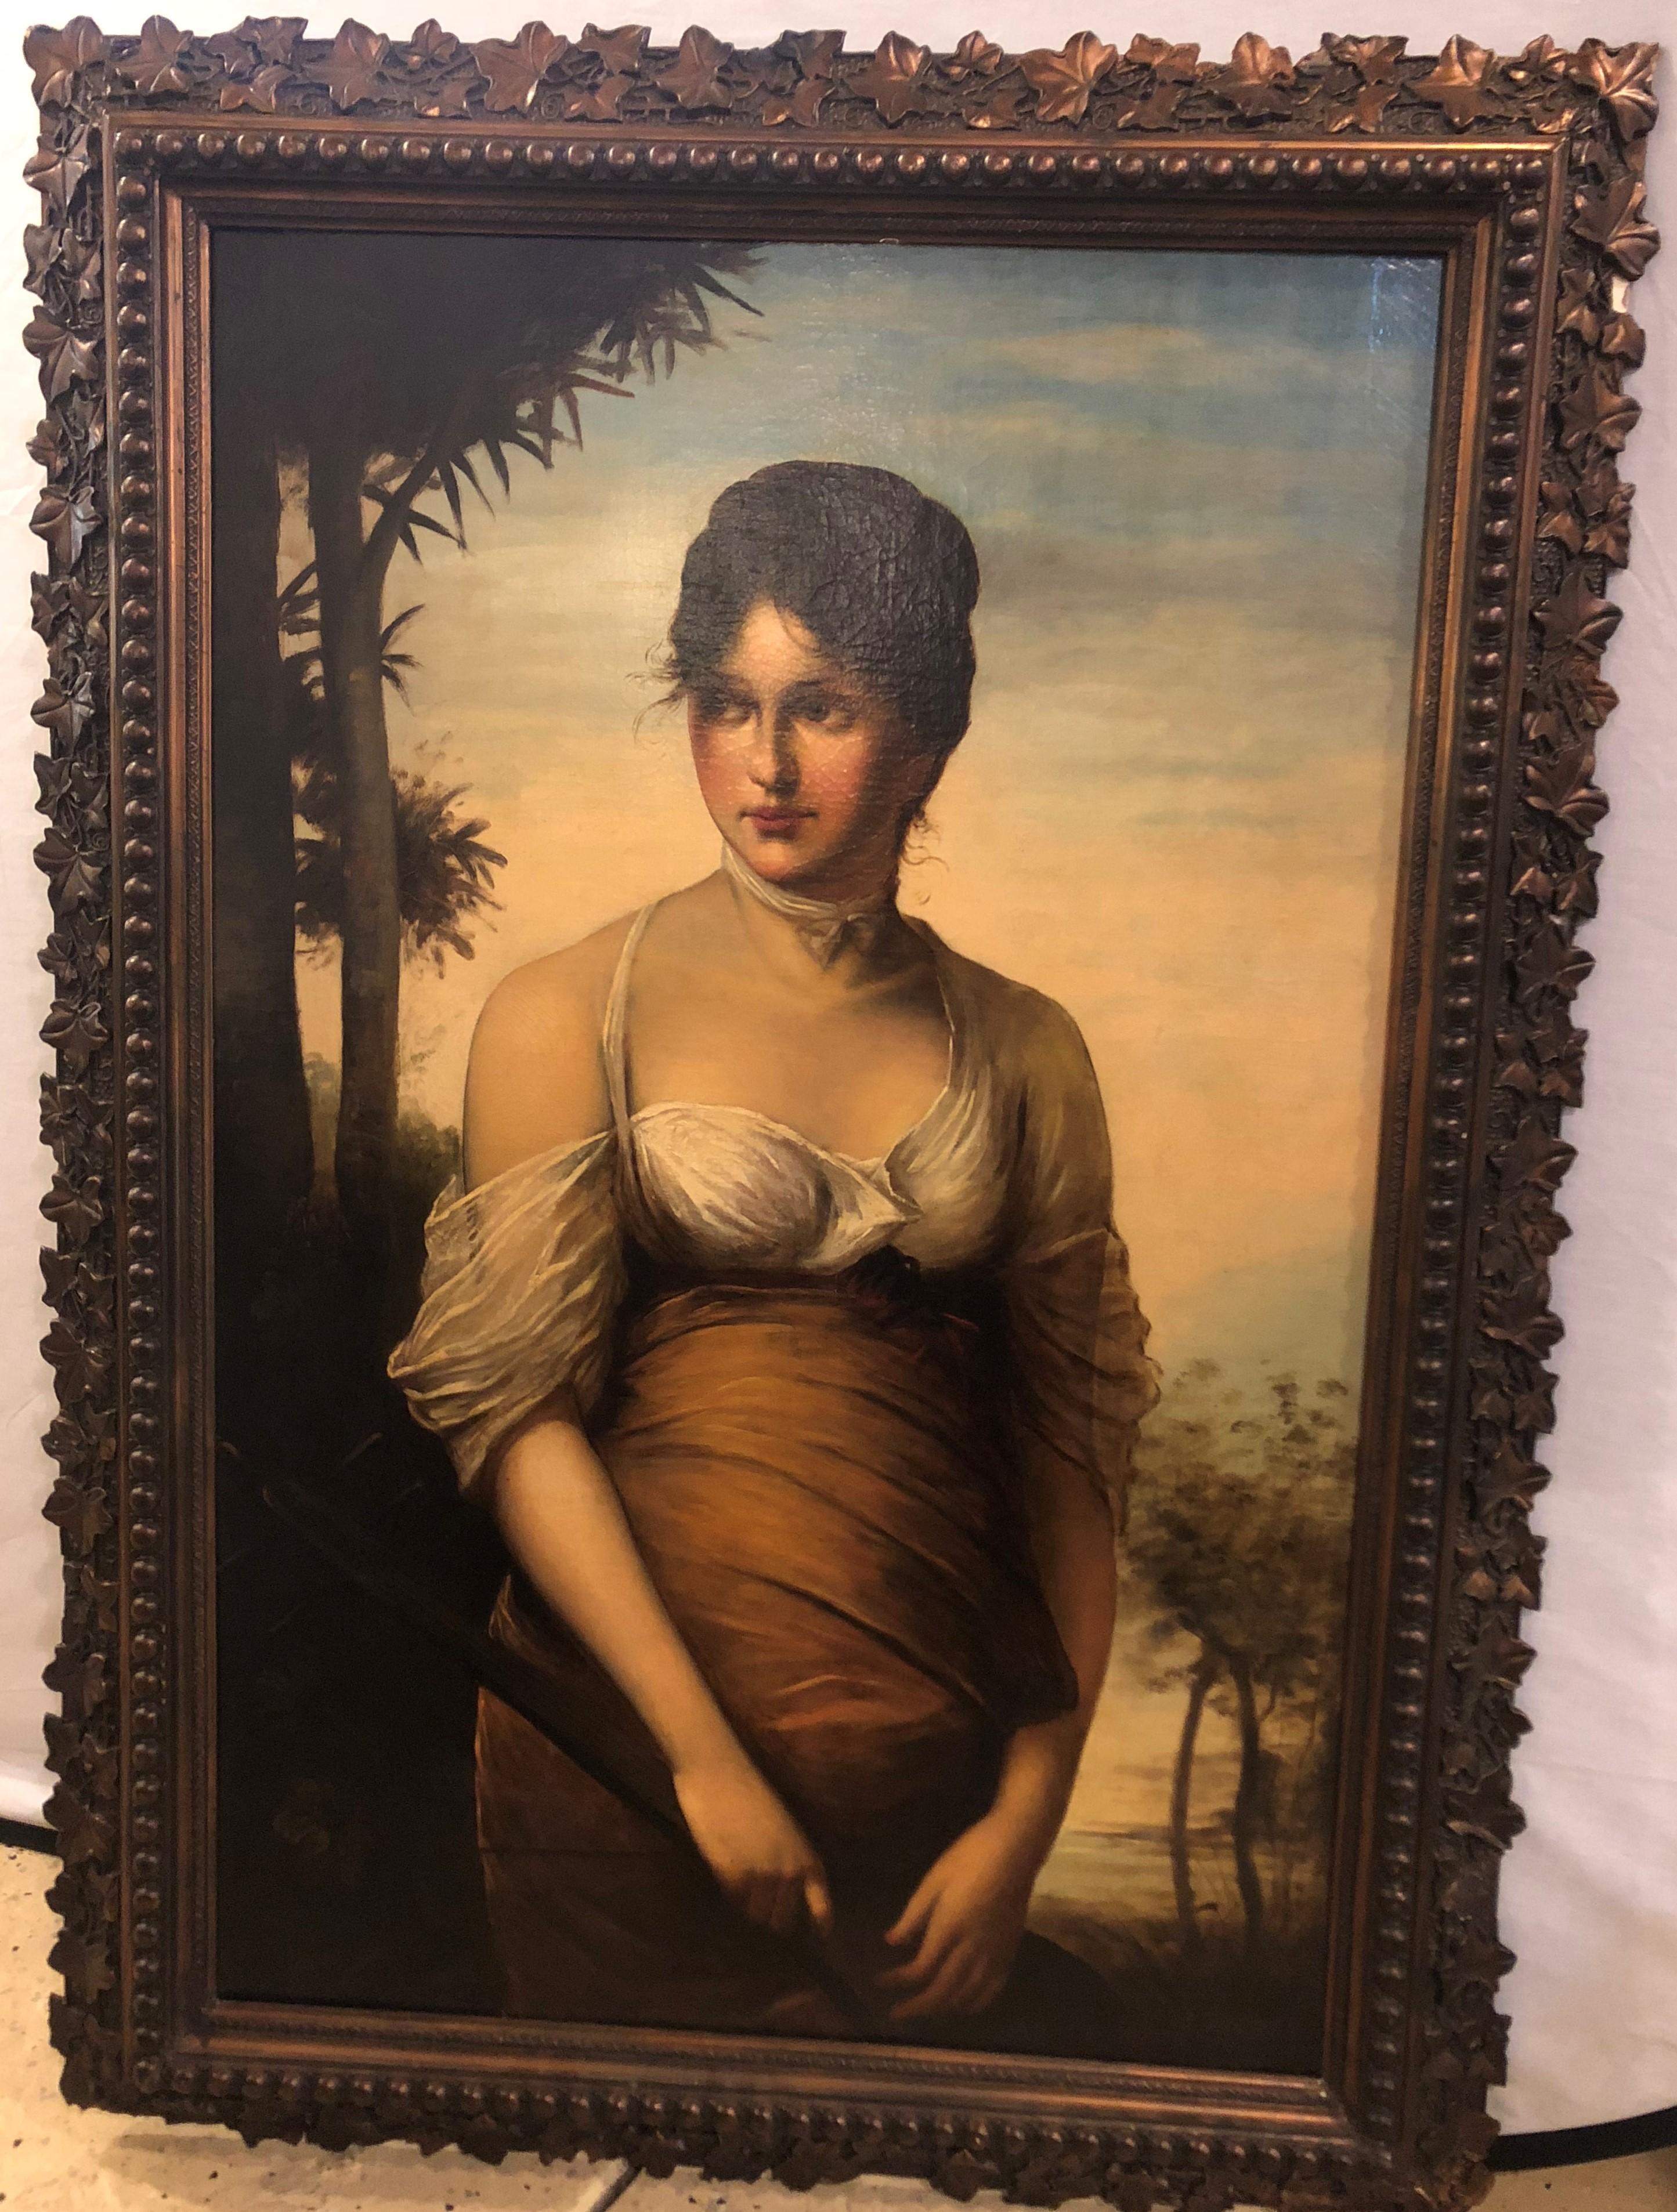 A 19th Century Oil On Canvas A Portrait Beautiful Maiden Signed A.Zienert. This finely detailed oil on canvas is simply stunning as the young woman seems to follow you as you gaze at her. The portrait set in a copper stained and polished frame